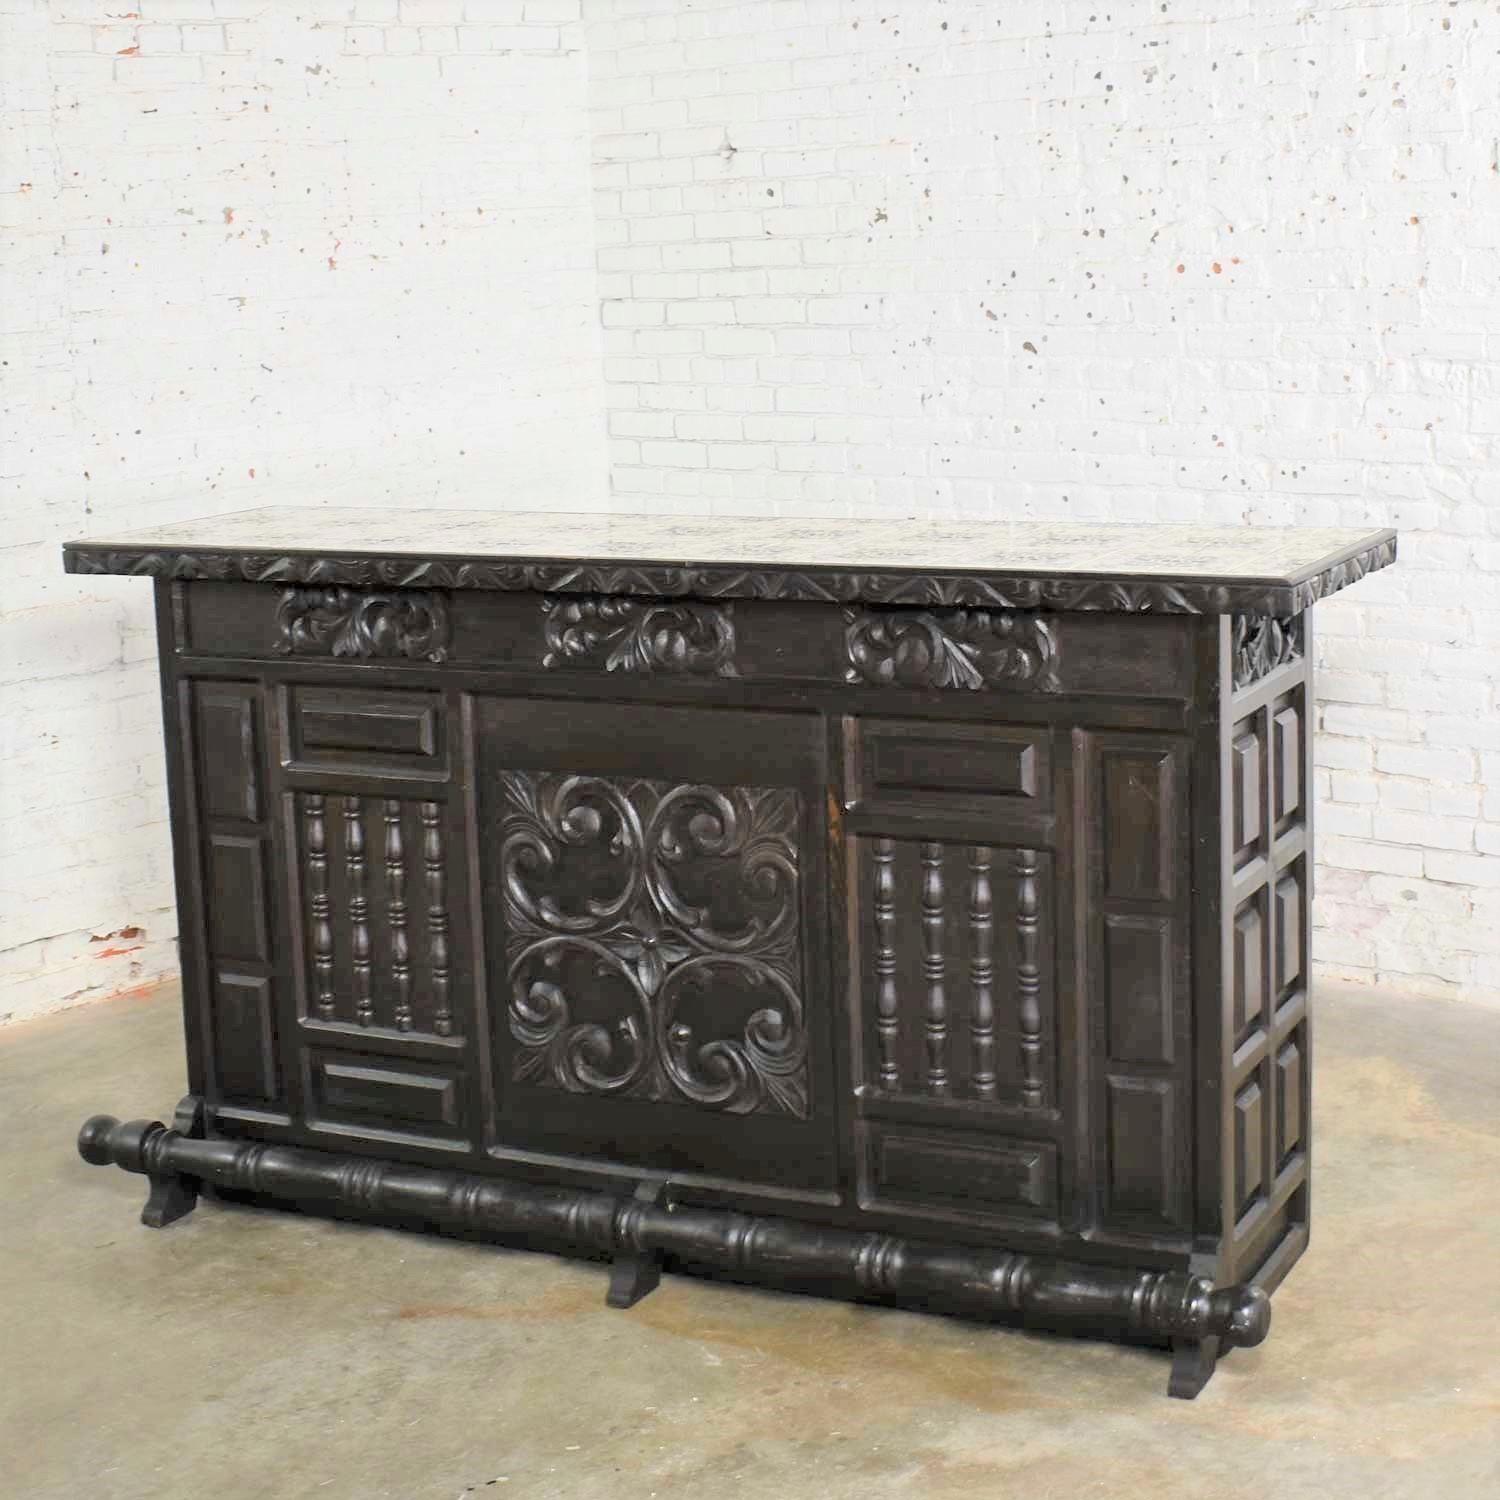 Handsome vintage Spanish Revival style dry bar with an inlaid tile top. It is unmarked but done in the style of Artes de Mexico International, SA. It is in wonderful vintage condition but not without flaws. The wood has a nice patina that can only